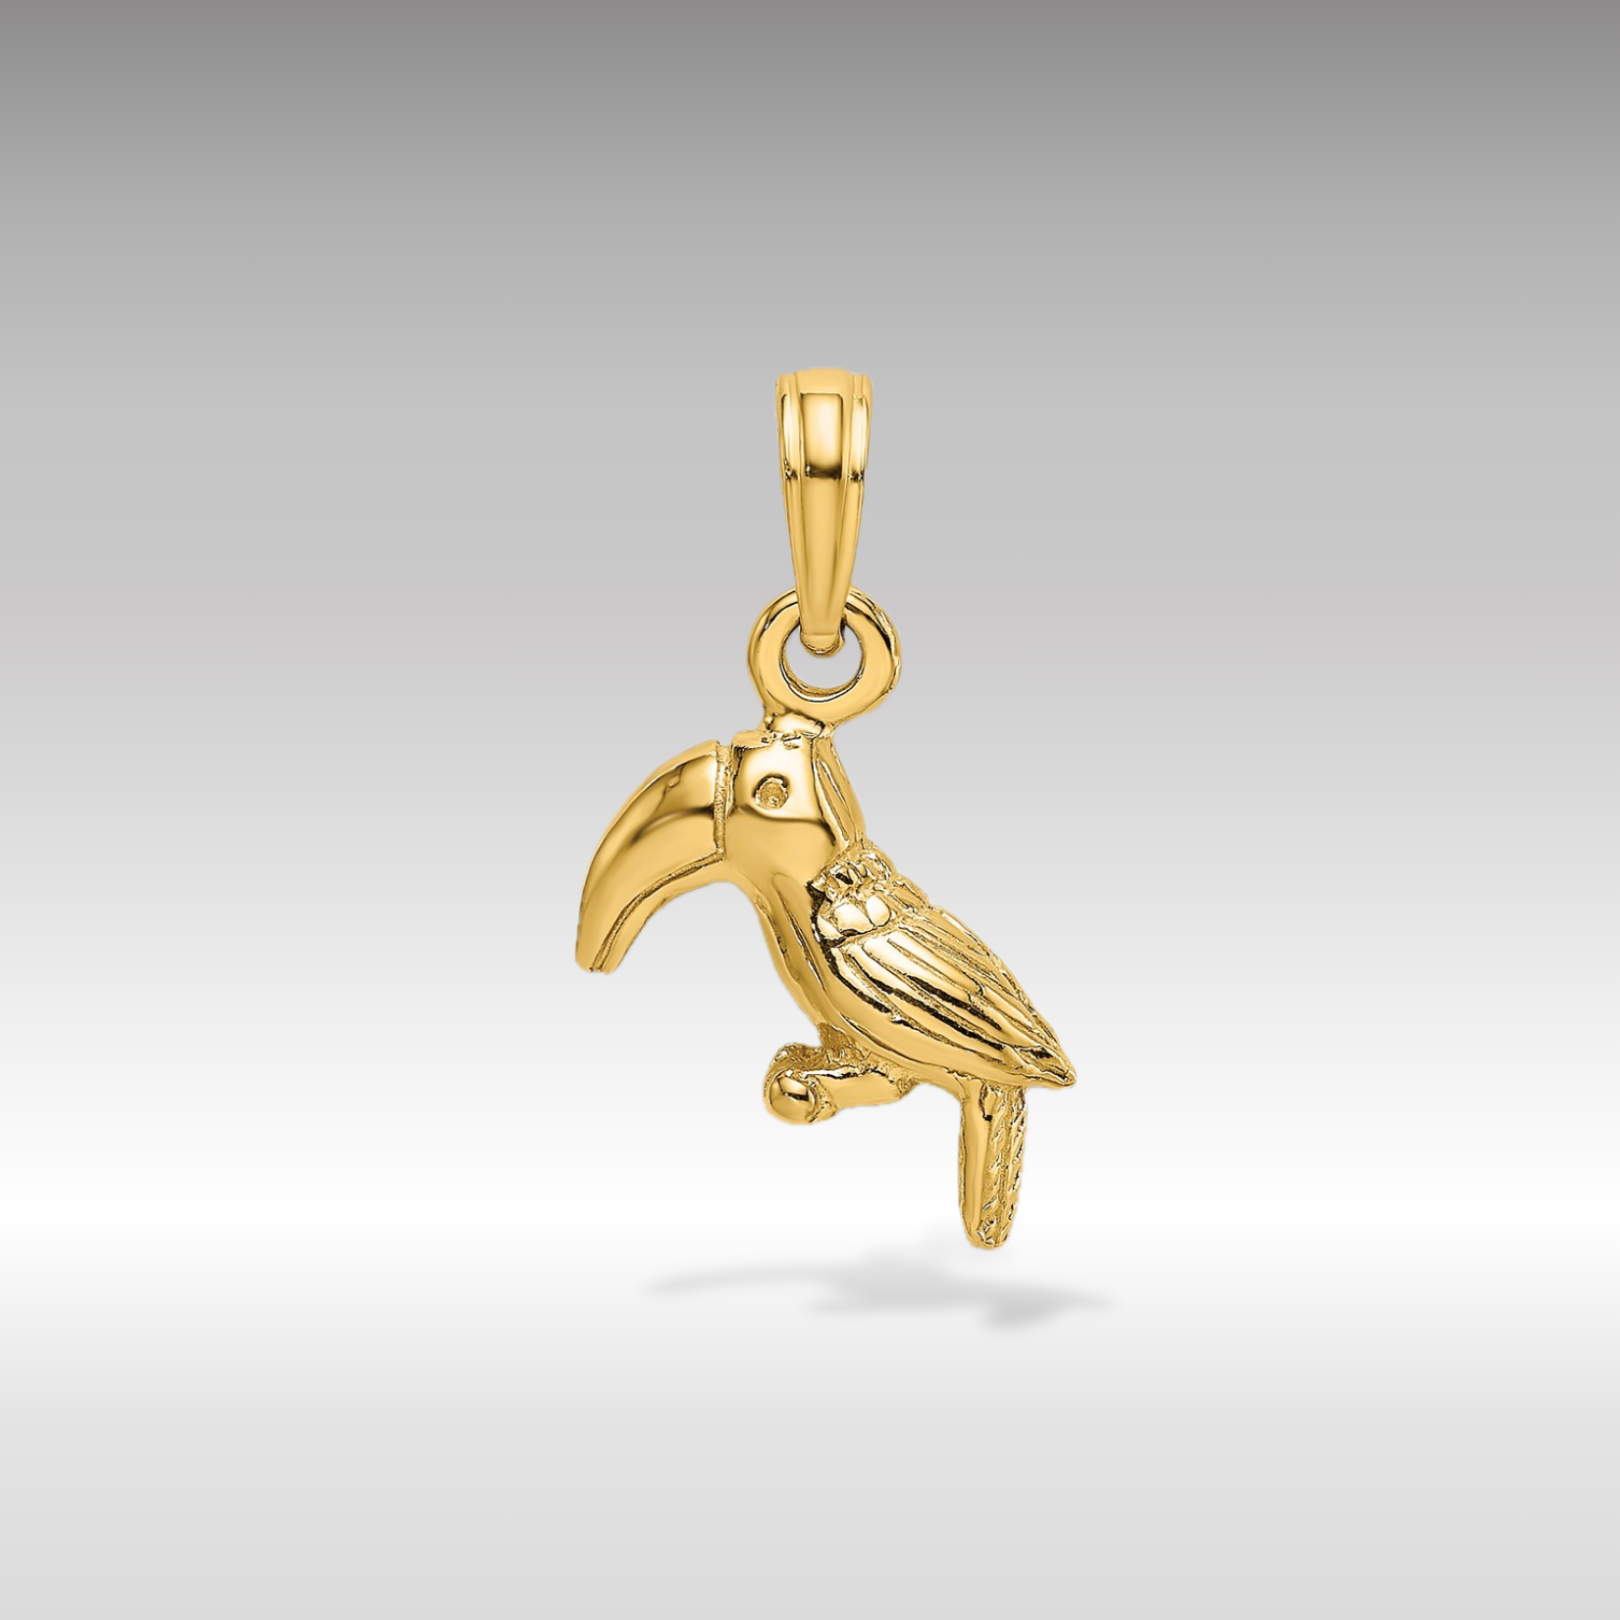 14K Gold 3D Textured/Polished Toucan Bird Pendant - Charlie & Co. Jewelry